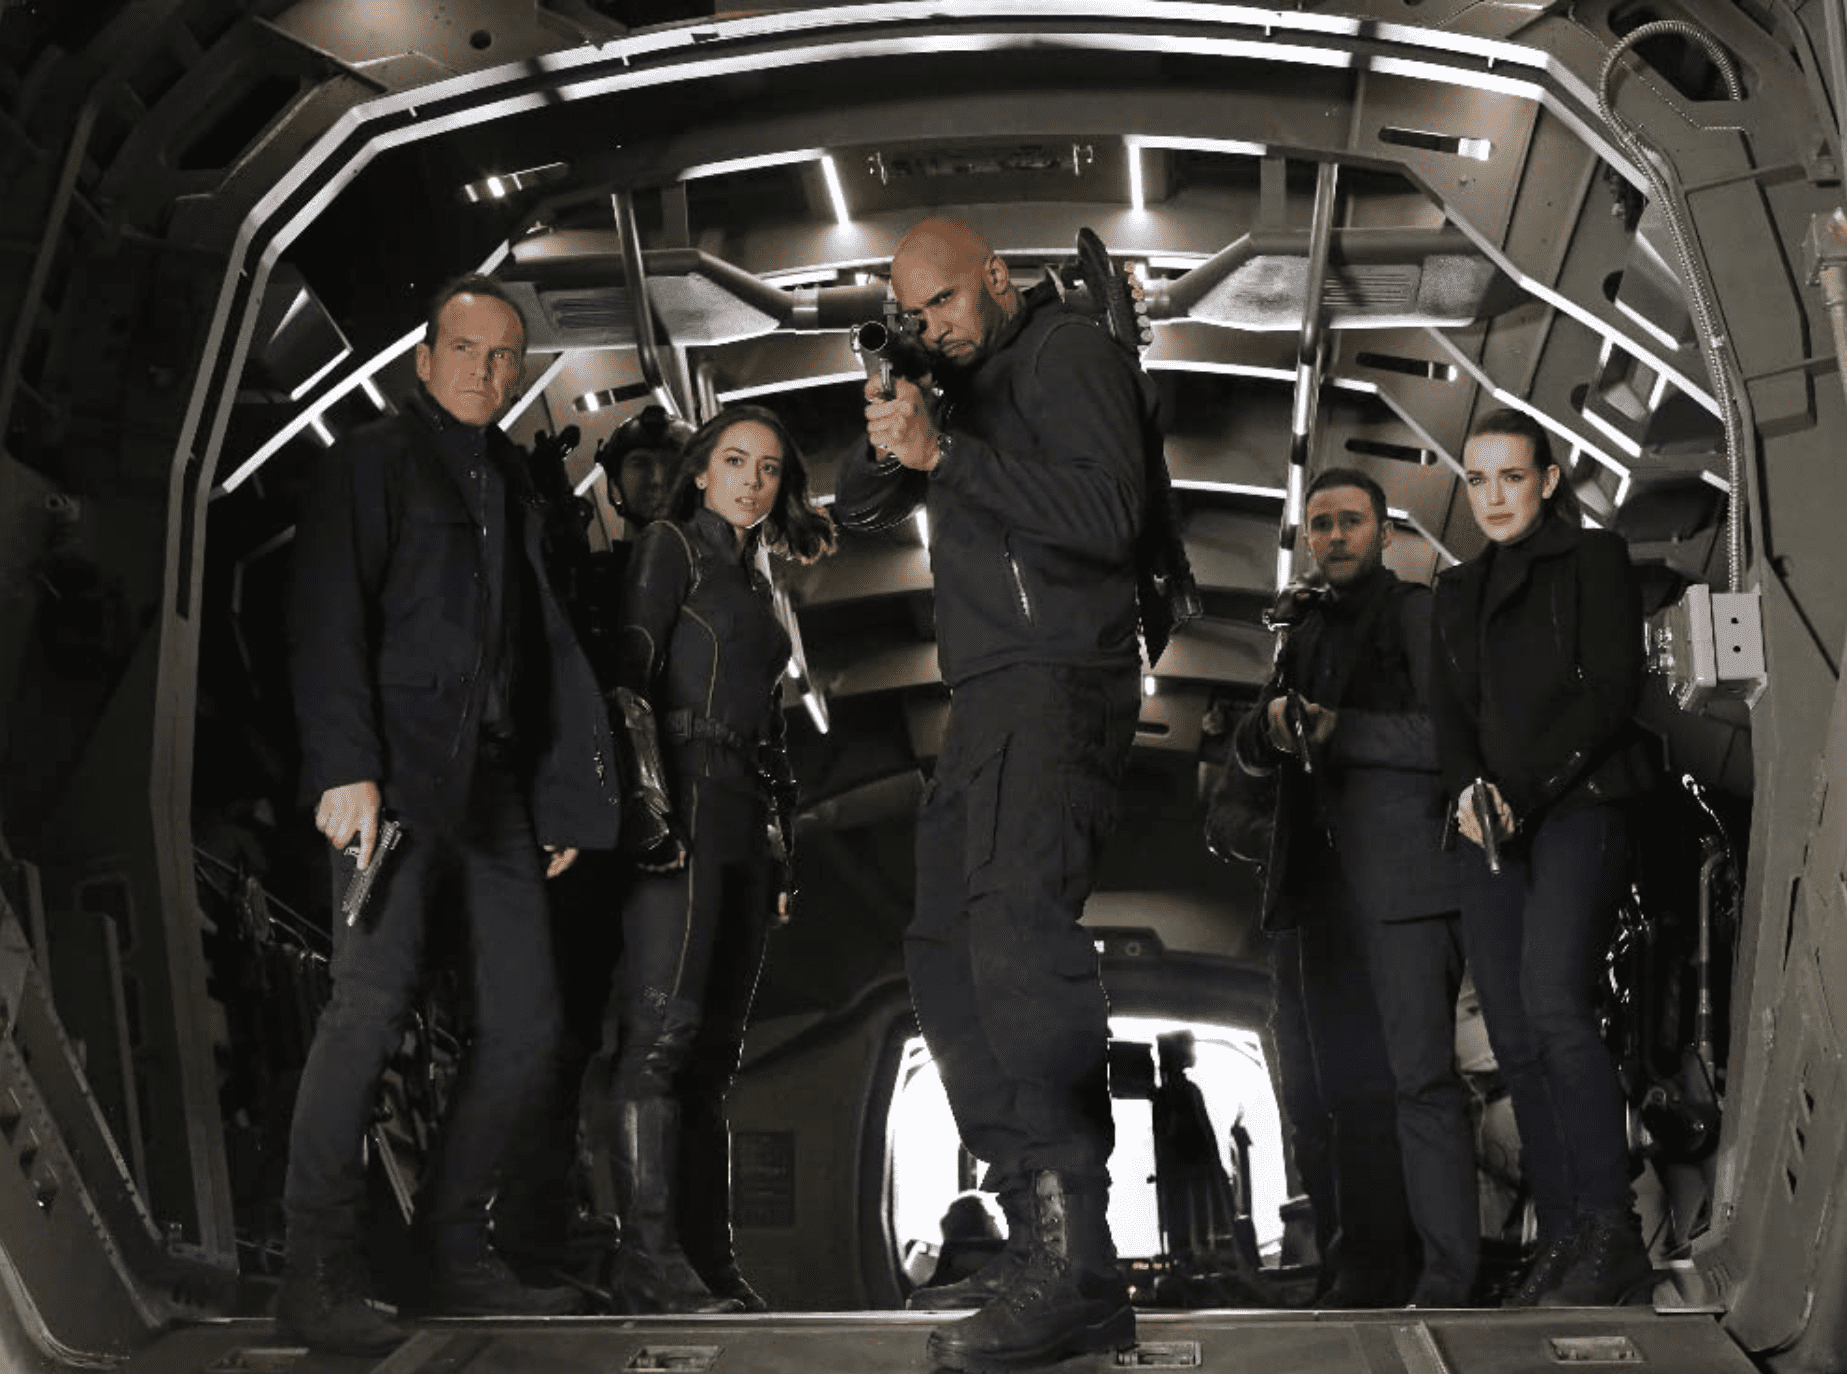 S.H.I.E.L.D. standing in an airplane while waiting for battle in this image from ABC Signature